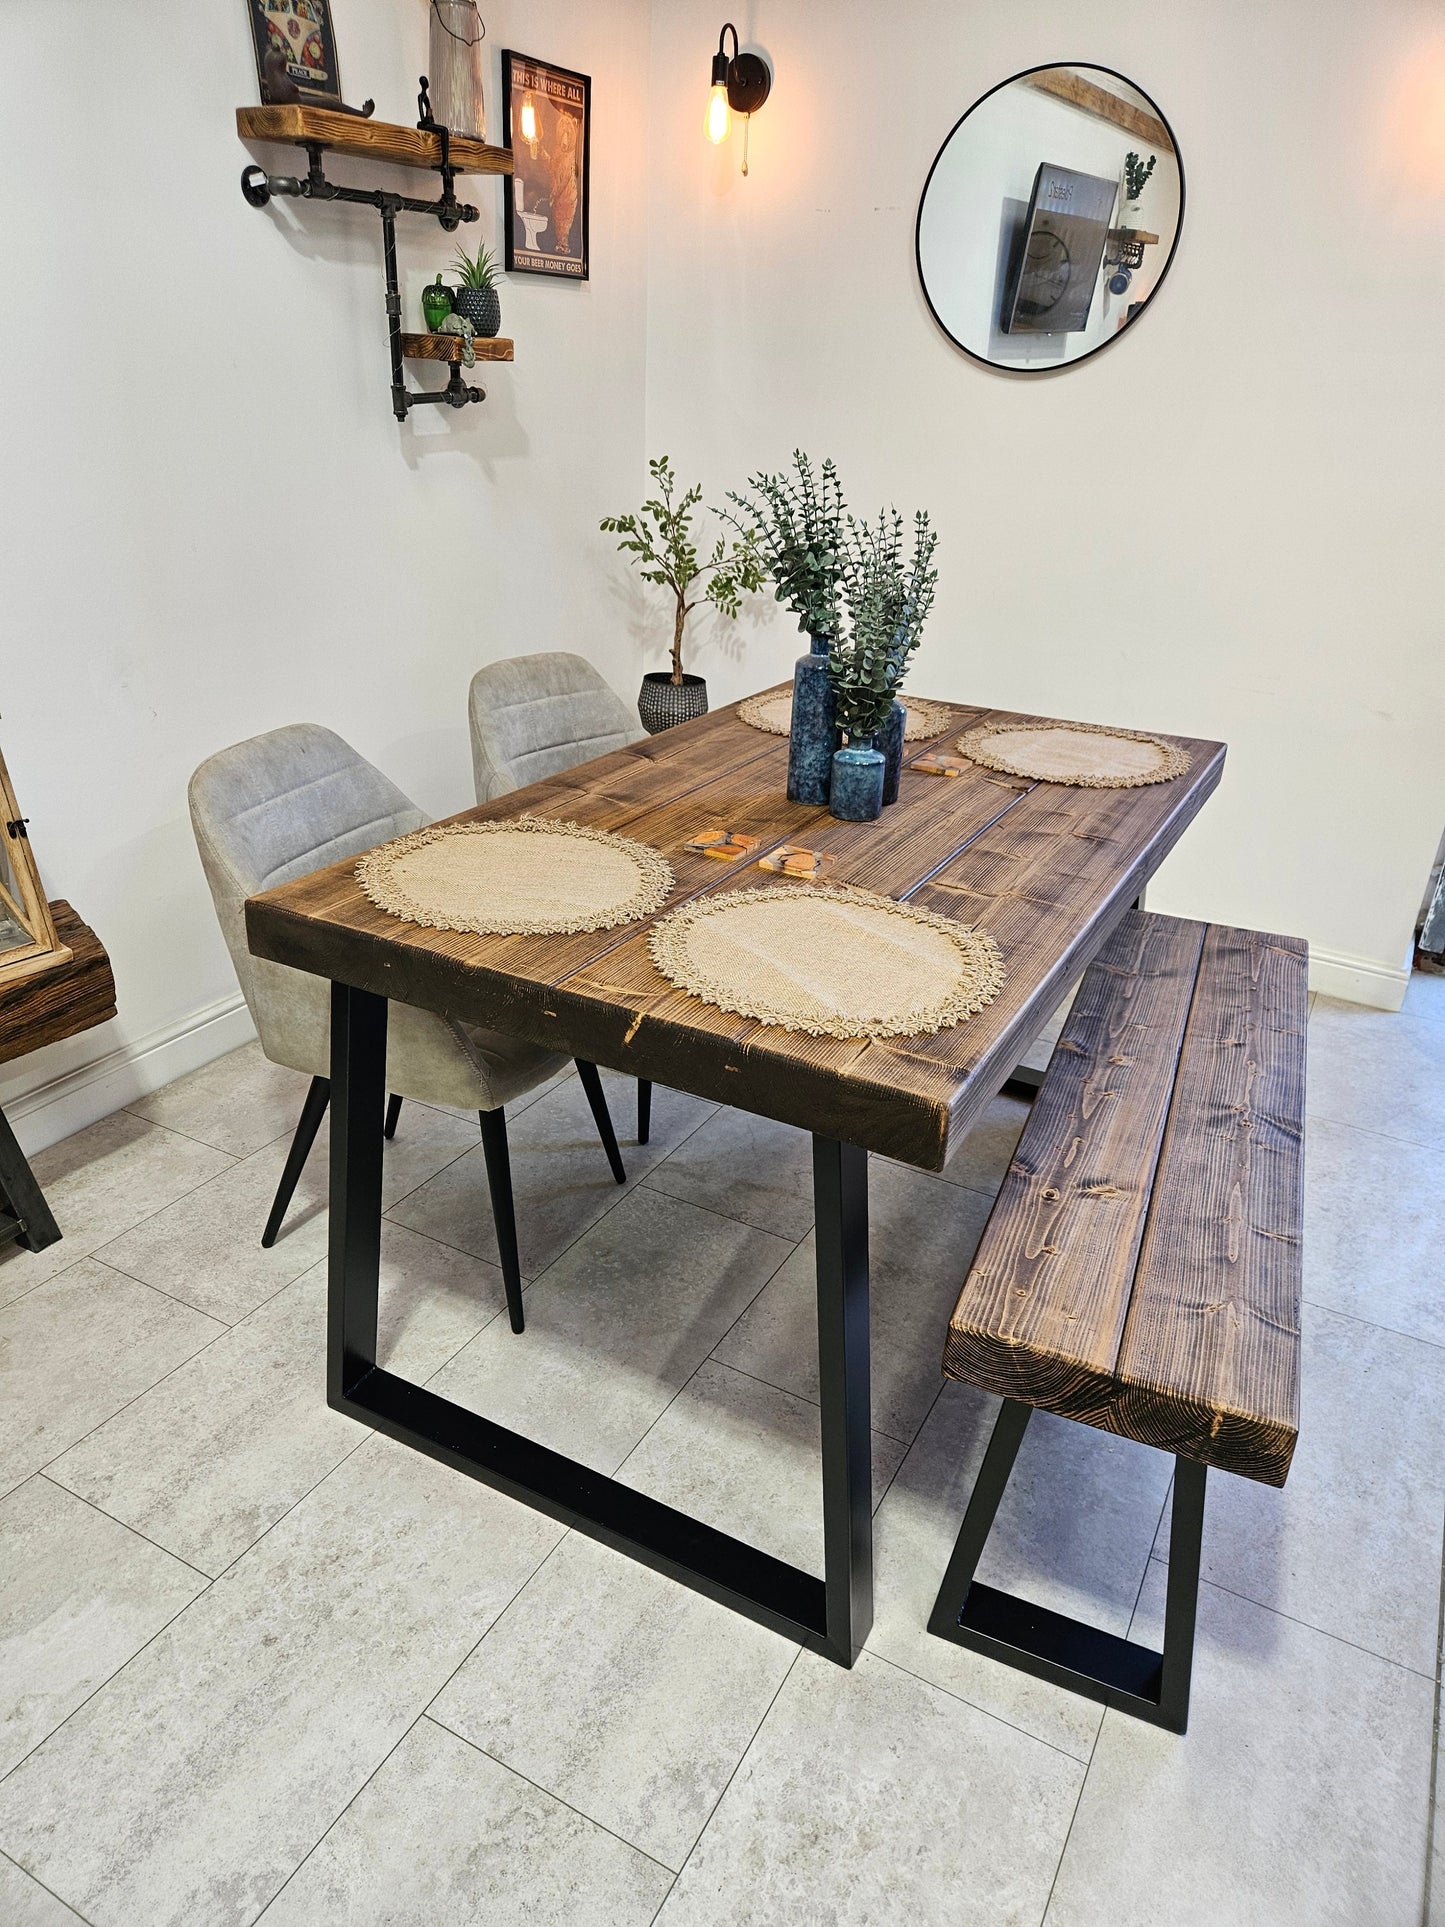 Dining table with bench and 2 chairs